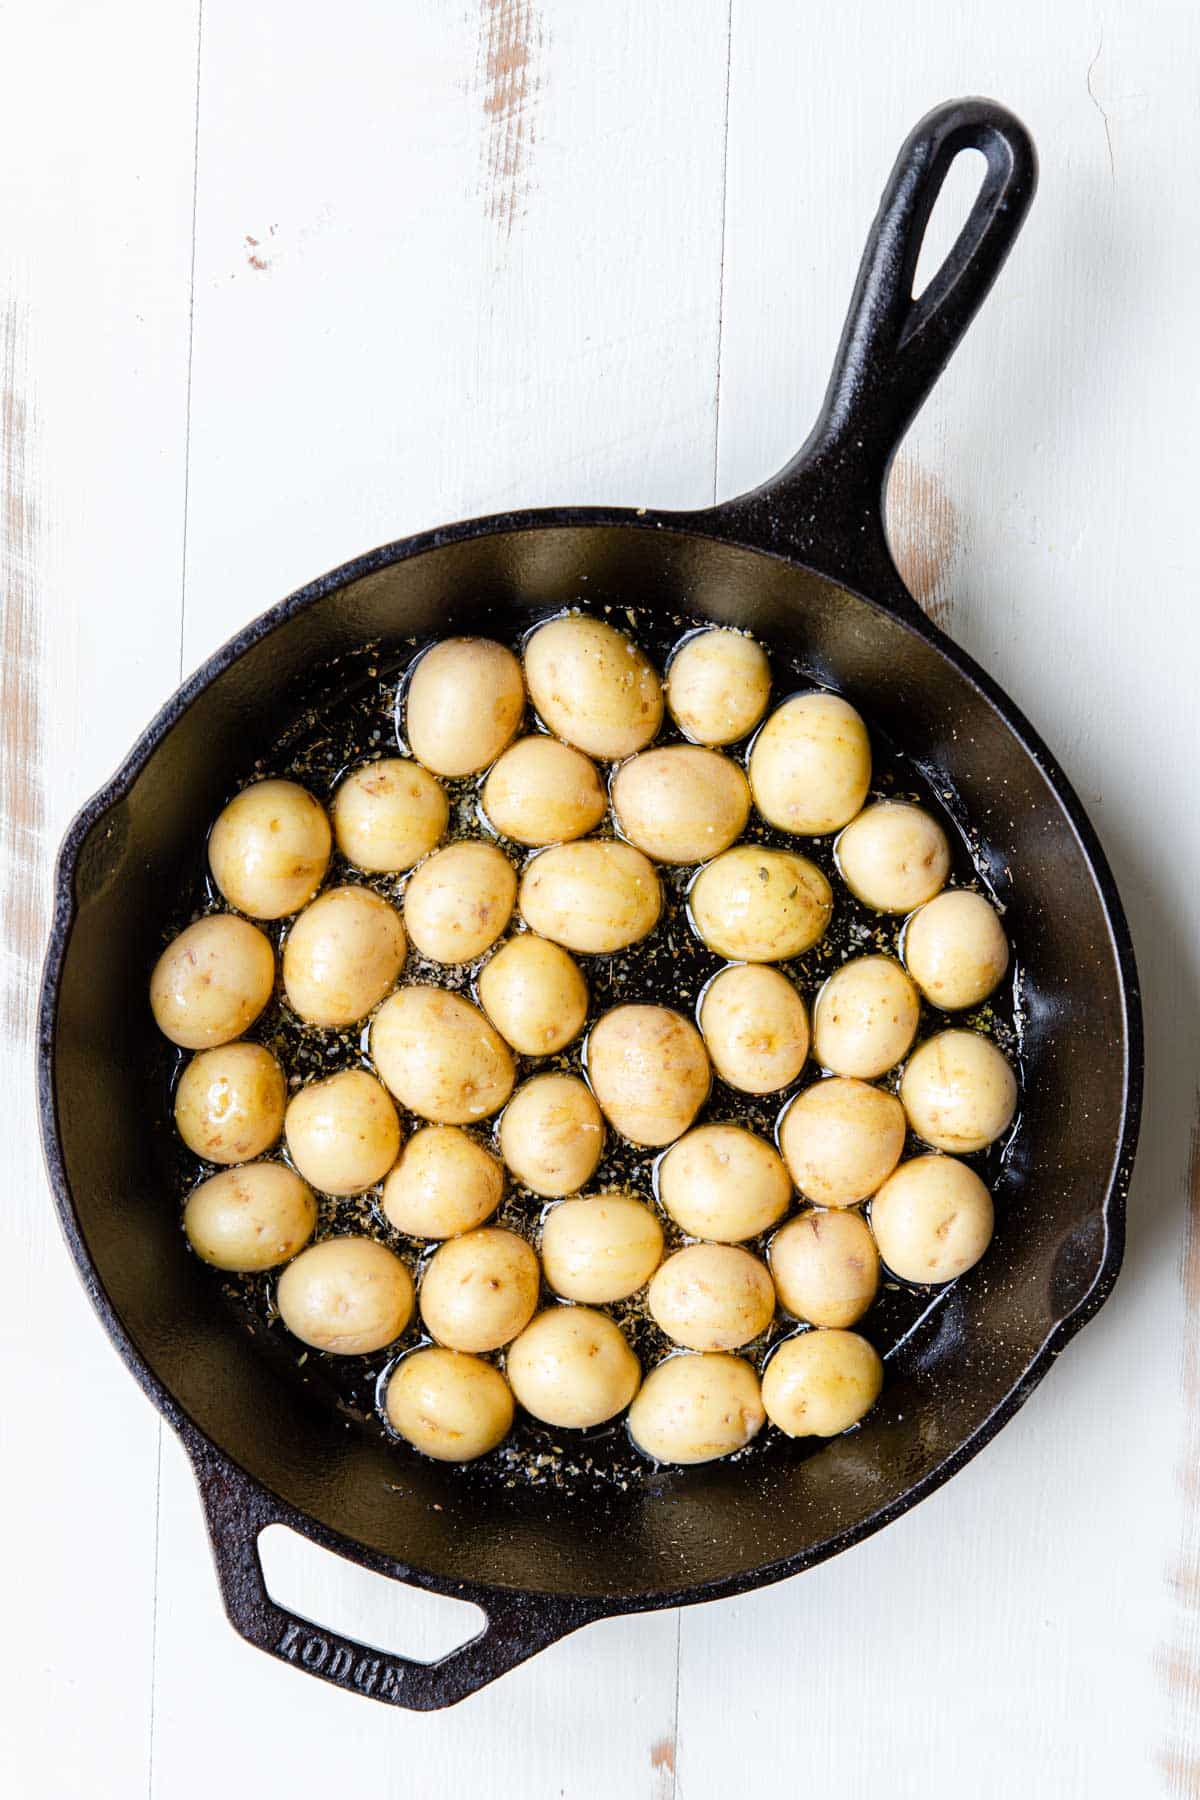 yukon gold potatoes cut in half and placed cut side down in a pan